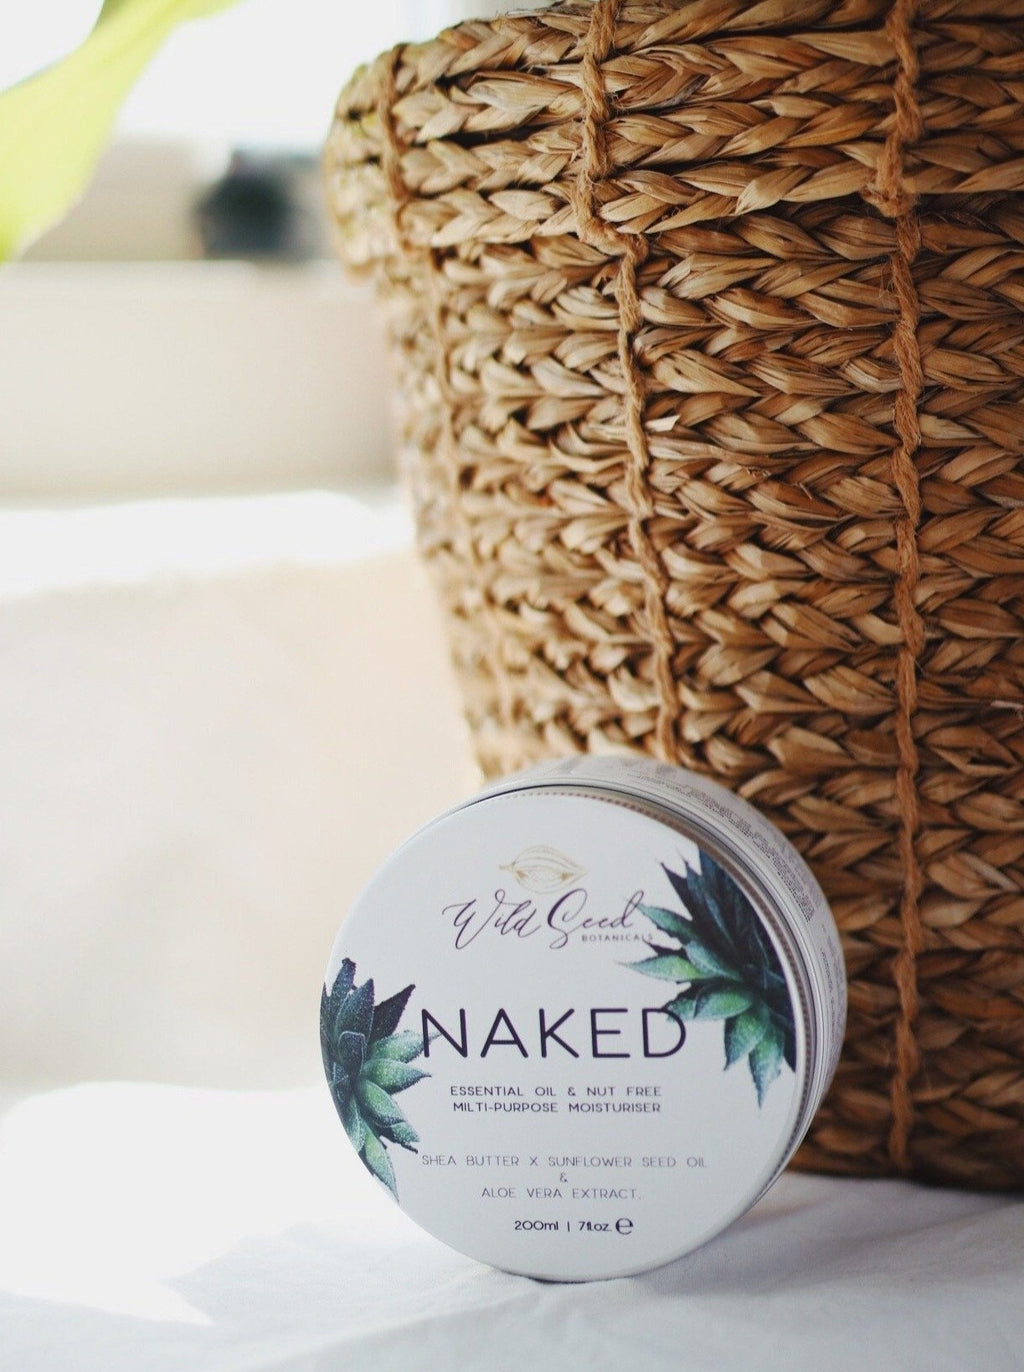 Best Whipped Shea Butter Fragrance & Nut Free  Naked Whipped Shea Butter –  Wild Seed Botanicals